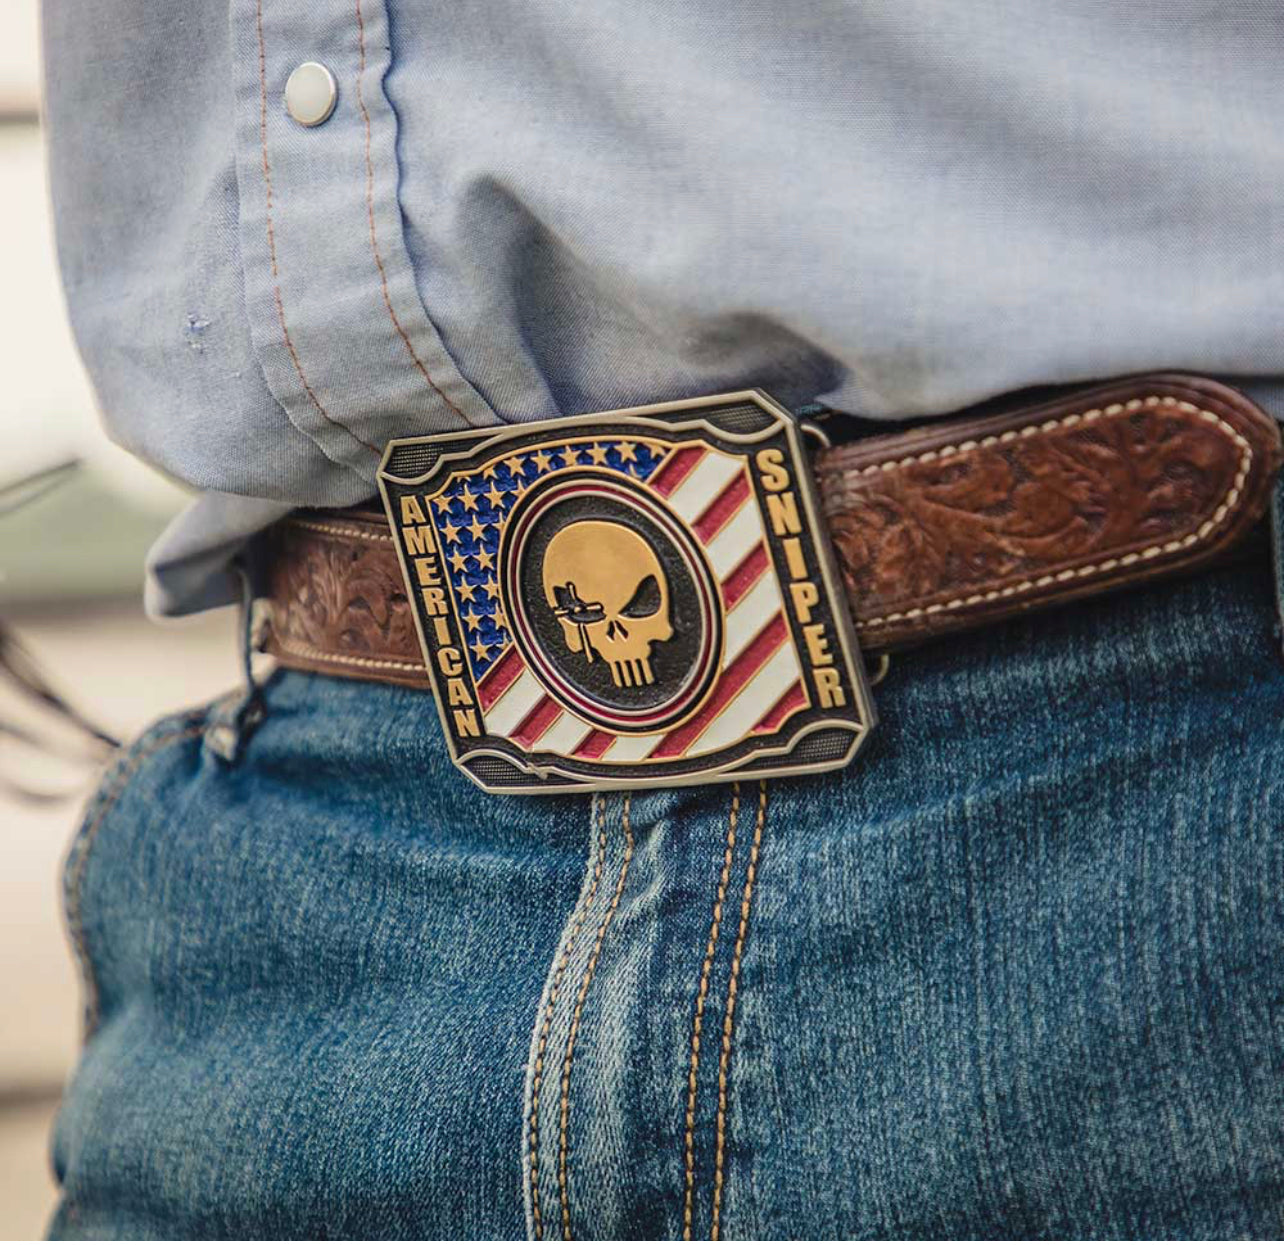 Cool Belt Buckle With Western Black Country Utility Belt